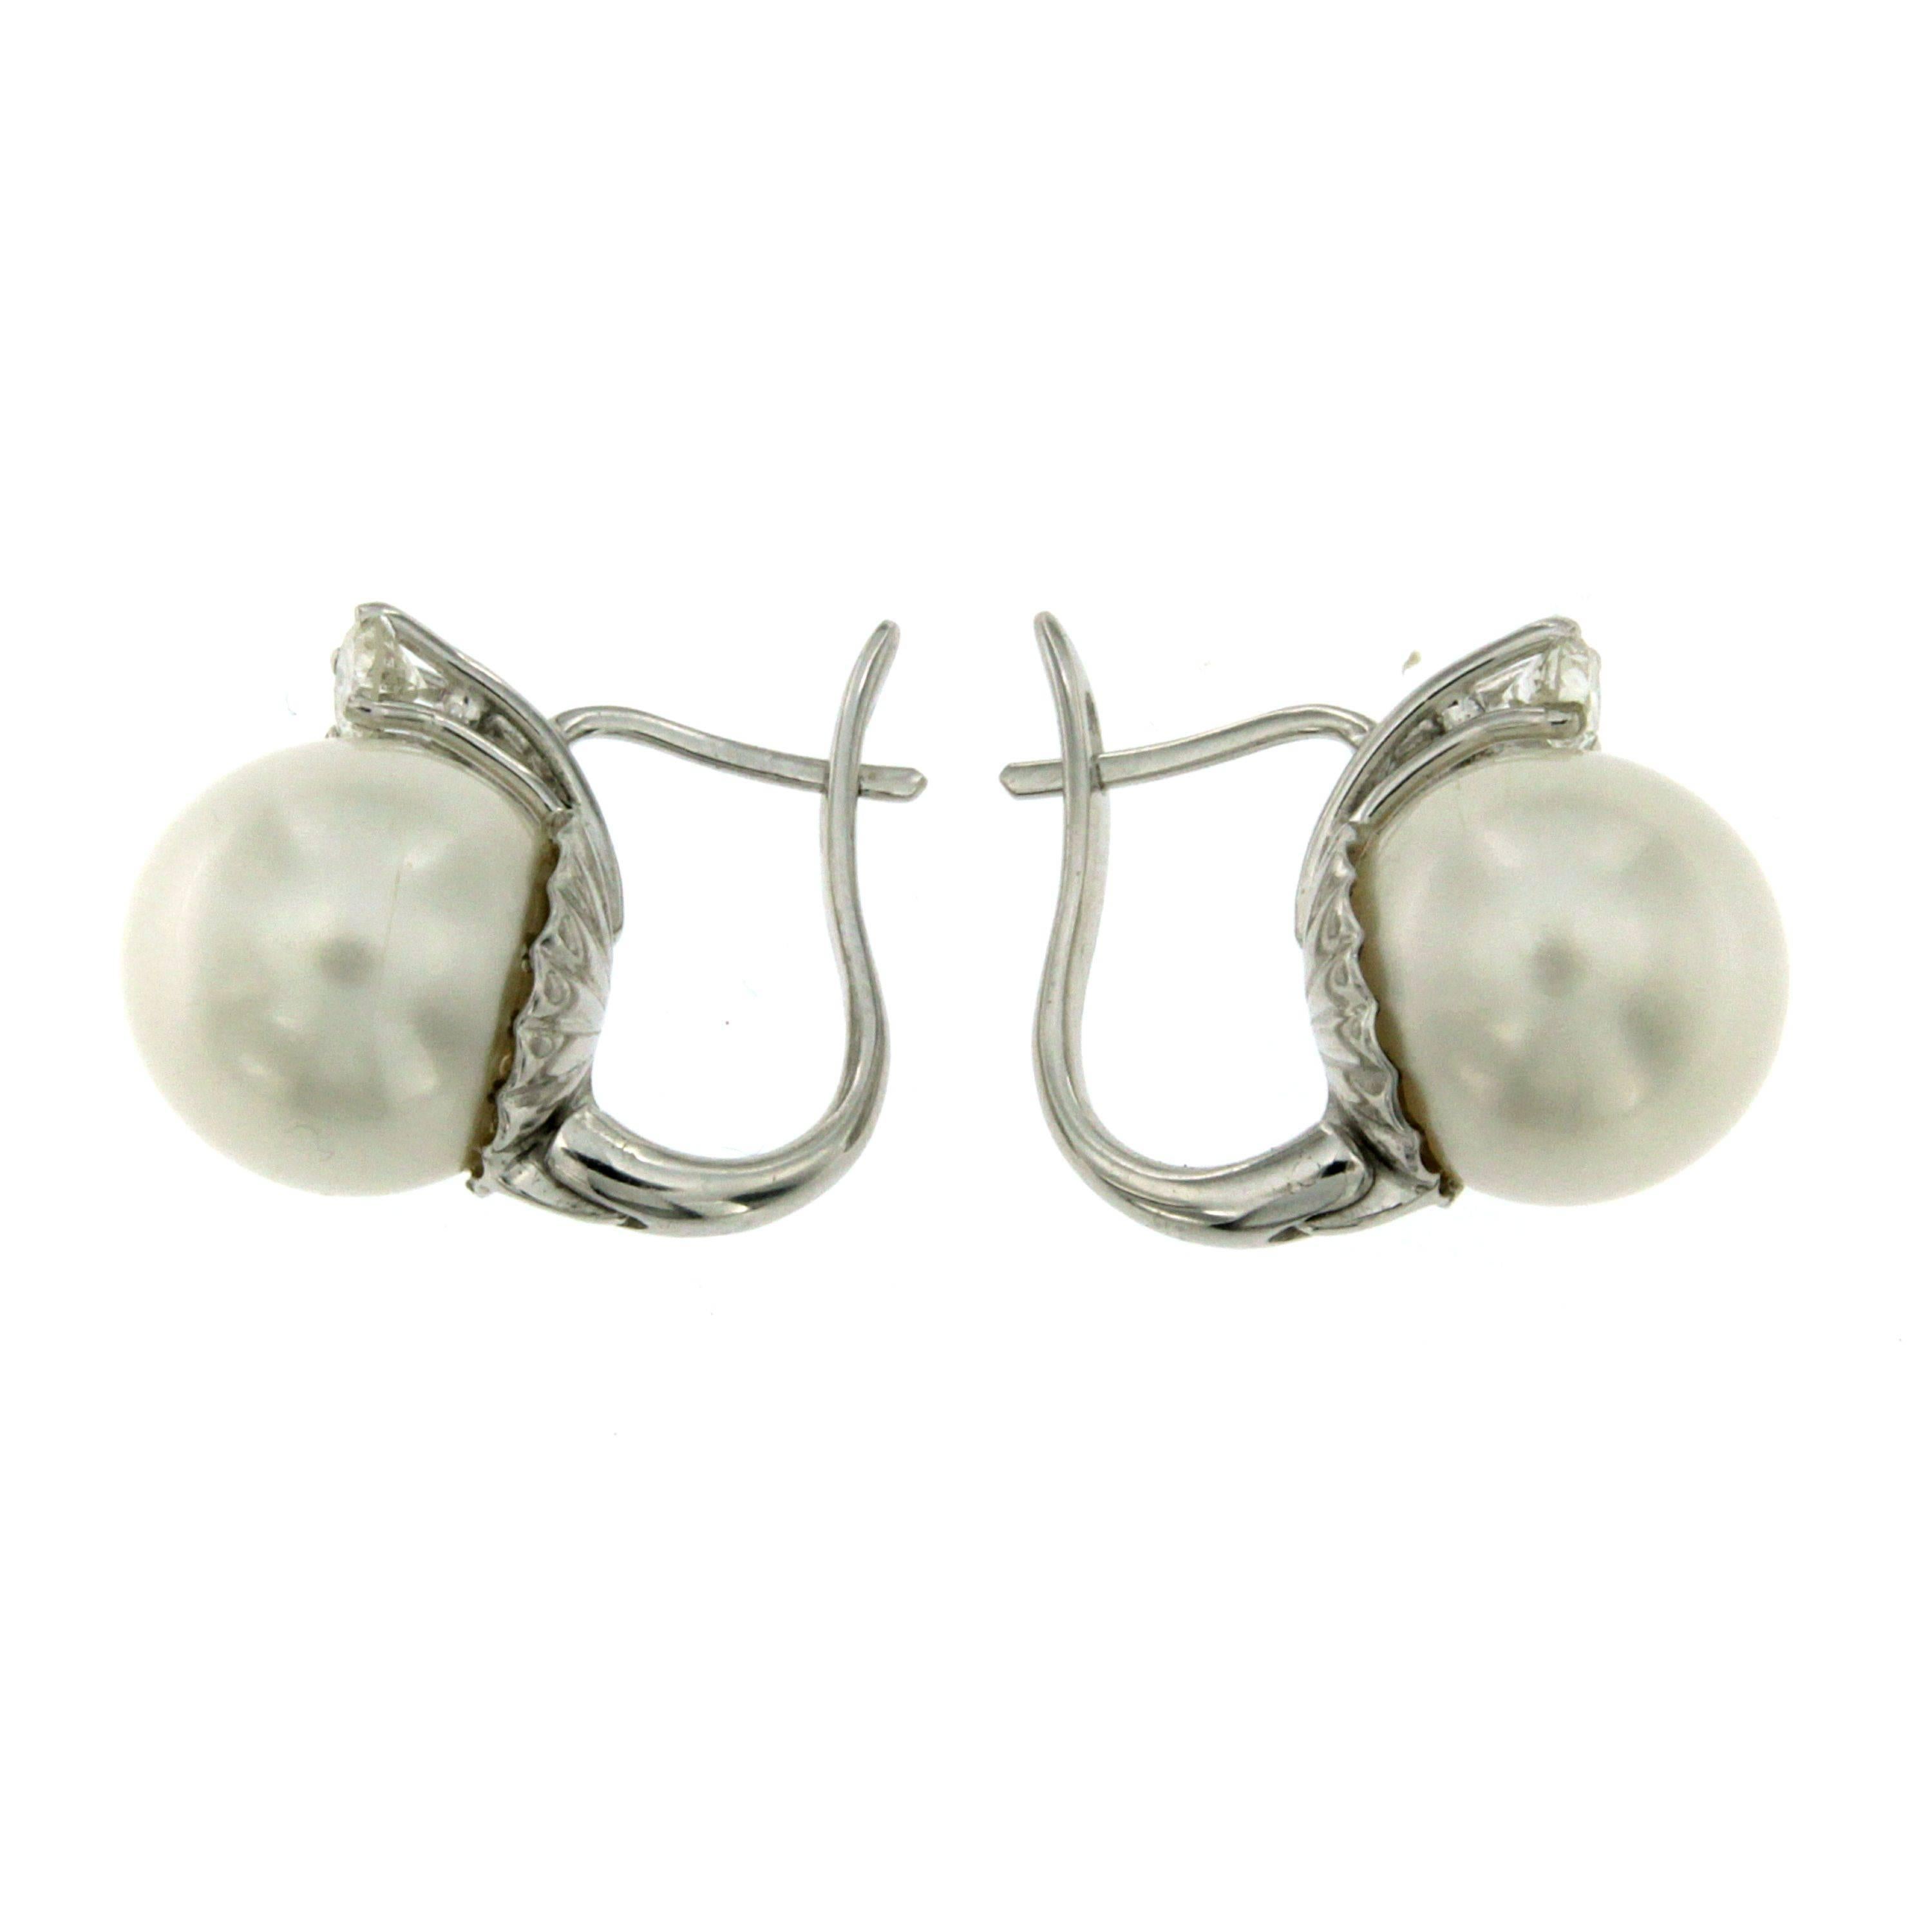 Stunning Earrings mounted in 18k white gold and set with 2 wide Australian south sea pearls of the greatest quality and weight, and 2 round Diamonds graded G color Vvs2
Pearls measure 13,30 mm

CONDITION: Pre-Owned - Excellent 
METAL: 18k white